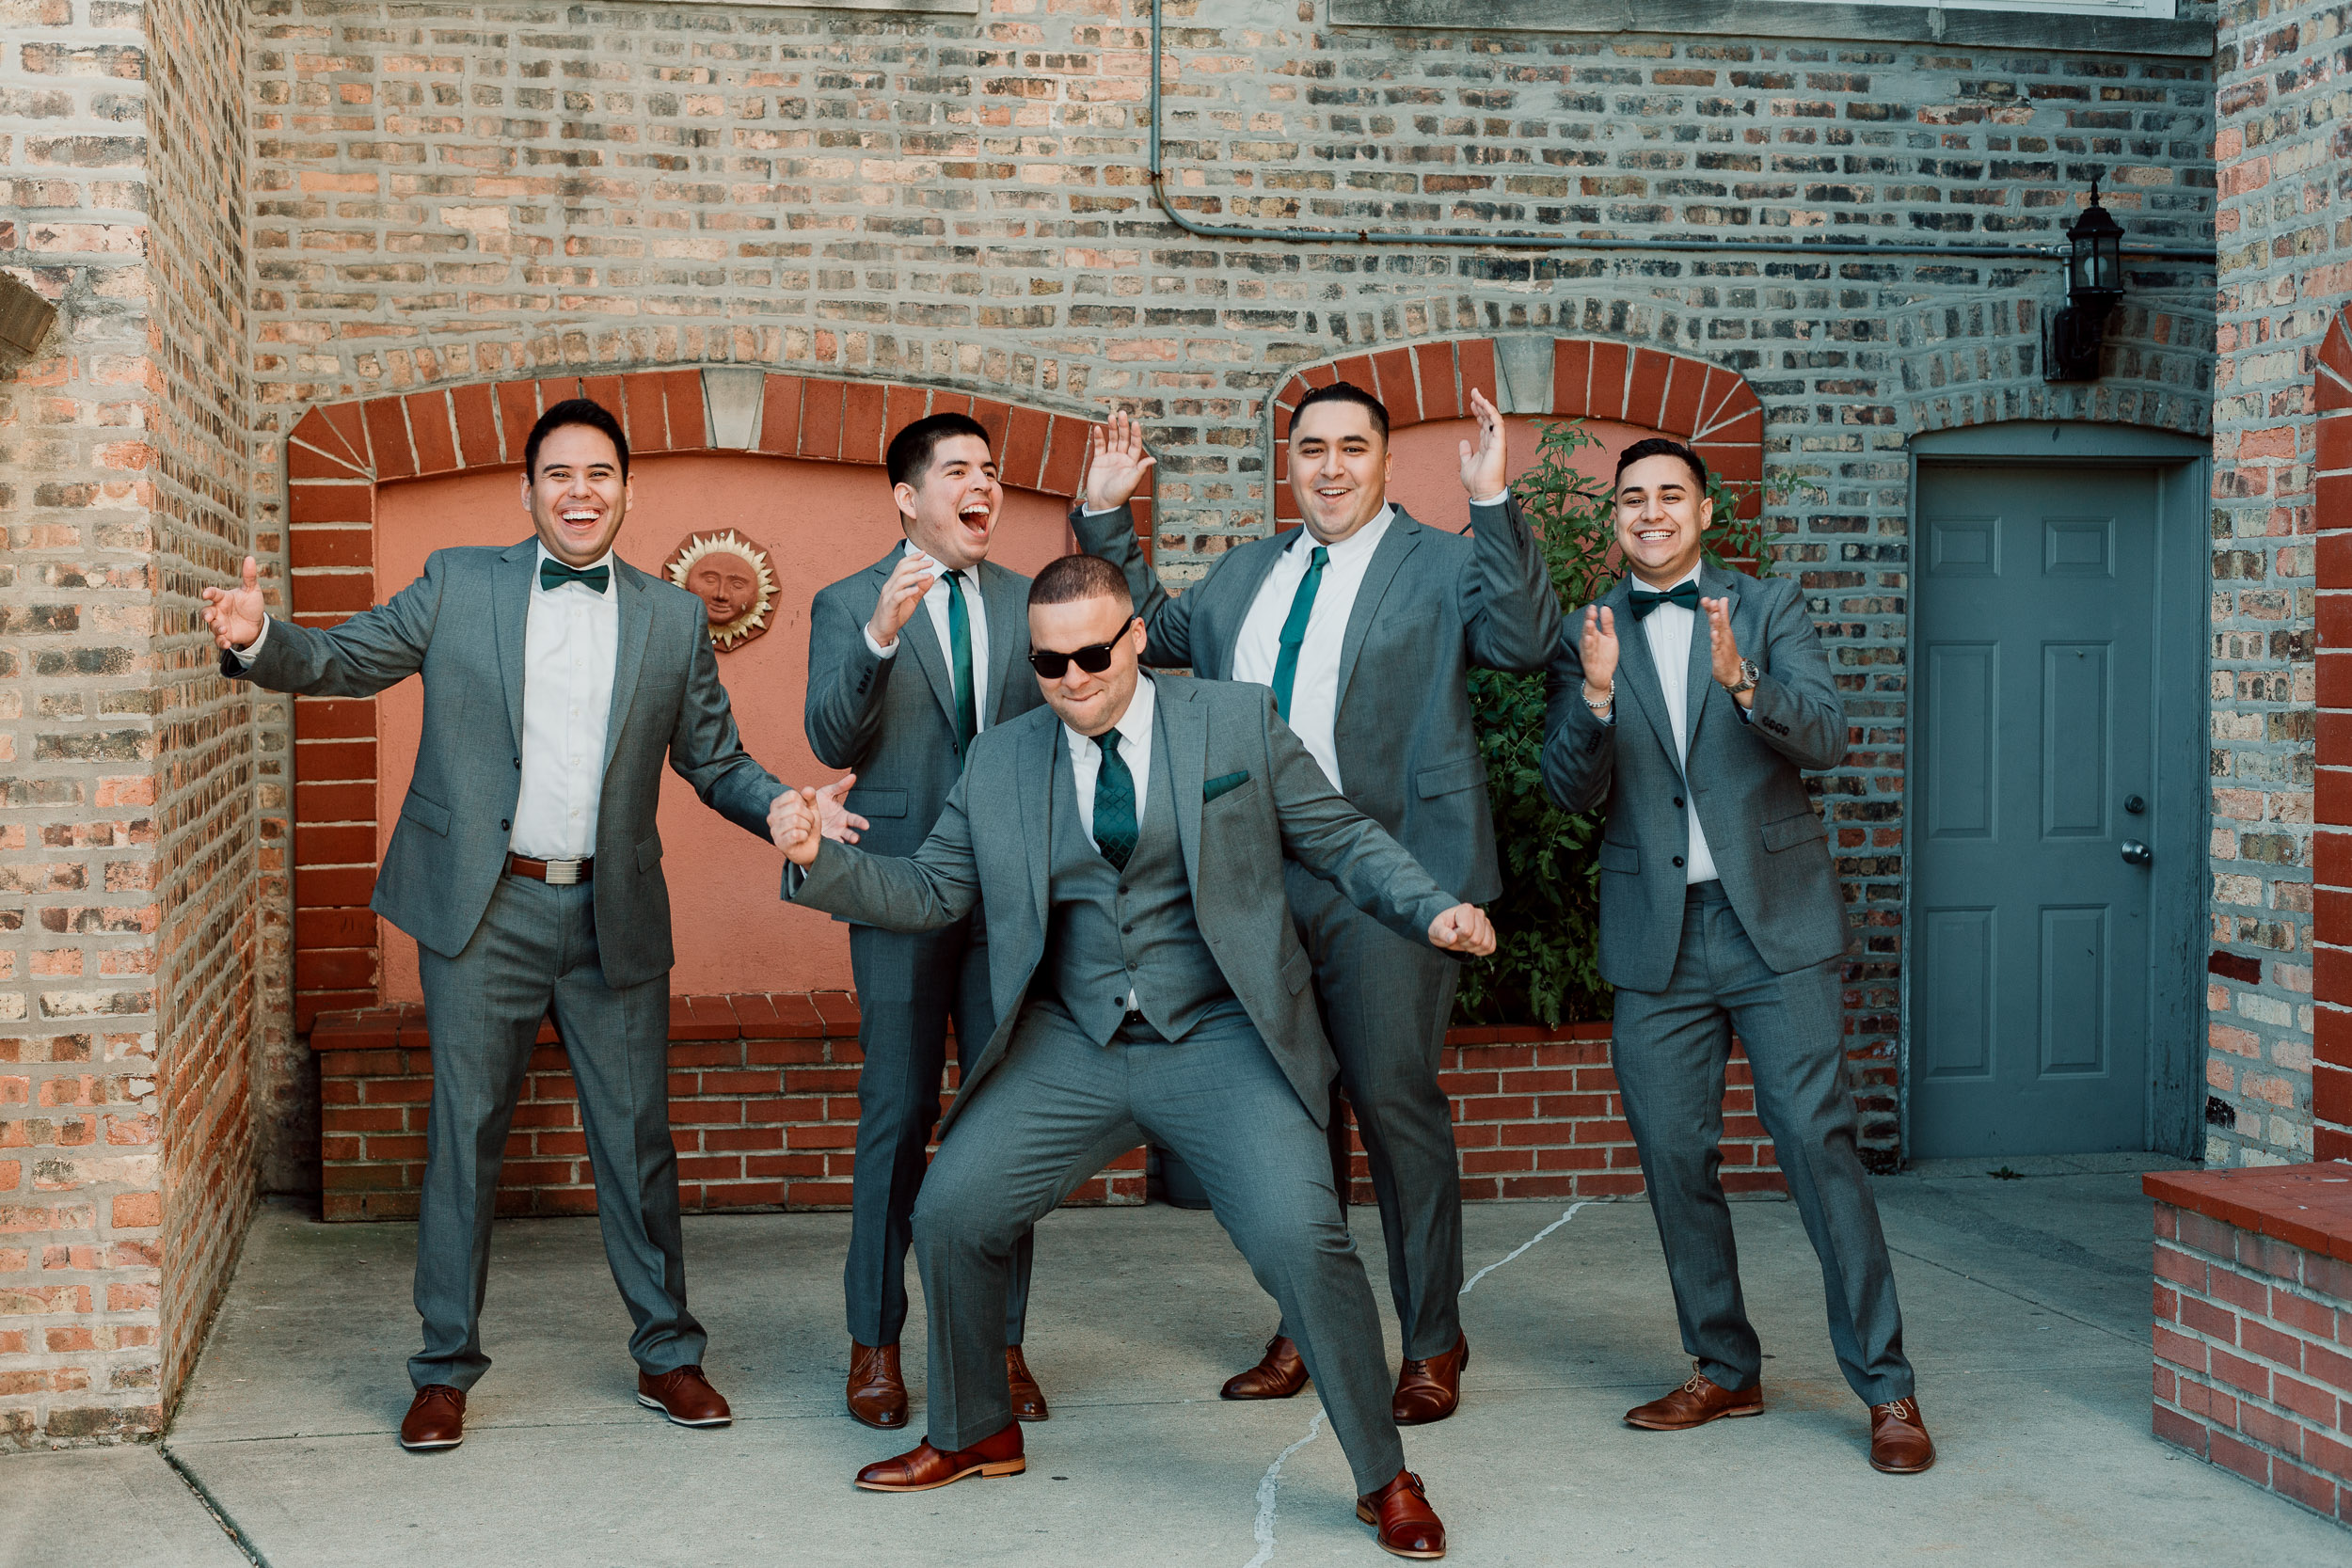 Groomsmen photos | Bridal party photos | Backyard Chicago Wedding | Engagement Ring | Hair Pin | Emotional Chicago Wedding | Historic Downtown Riverside Wedding Photos | Chicago Wedding Photographer | Metra Station Wedding Photos | Small Weddings in Chicago | Intimate Elopements in Chicago